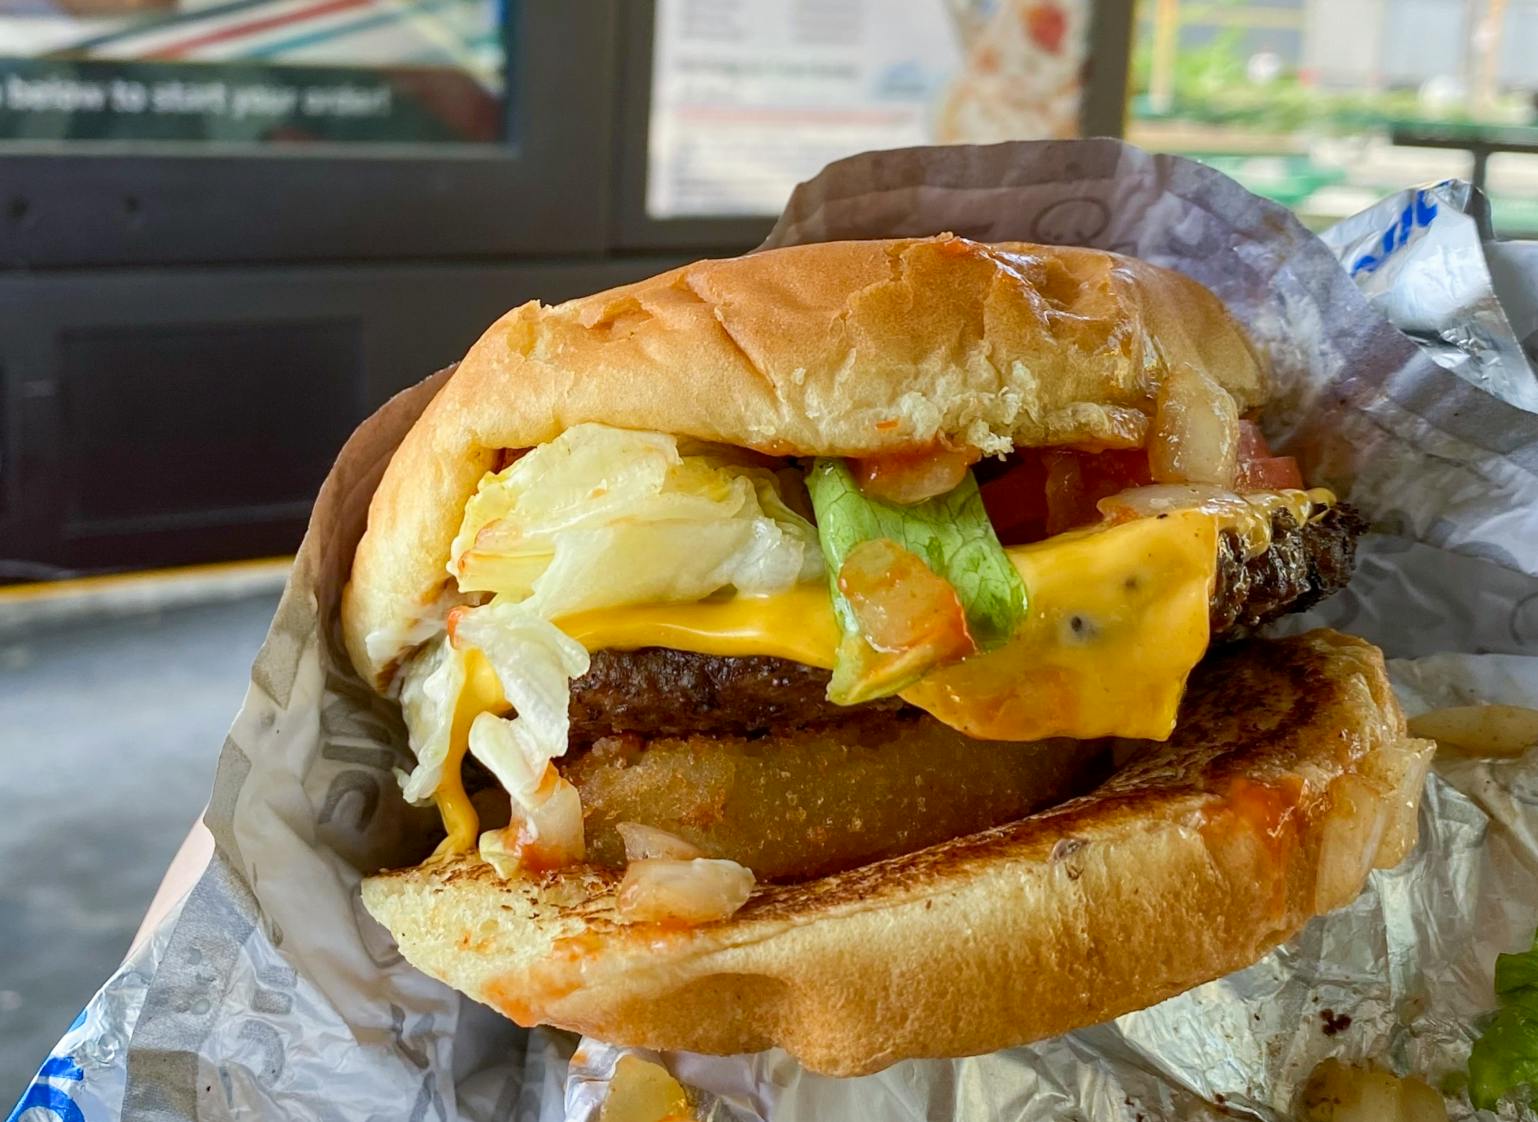 A close-up of a Sonic cheeseburger with onion rings added to it.